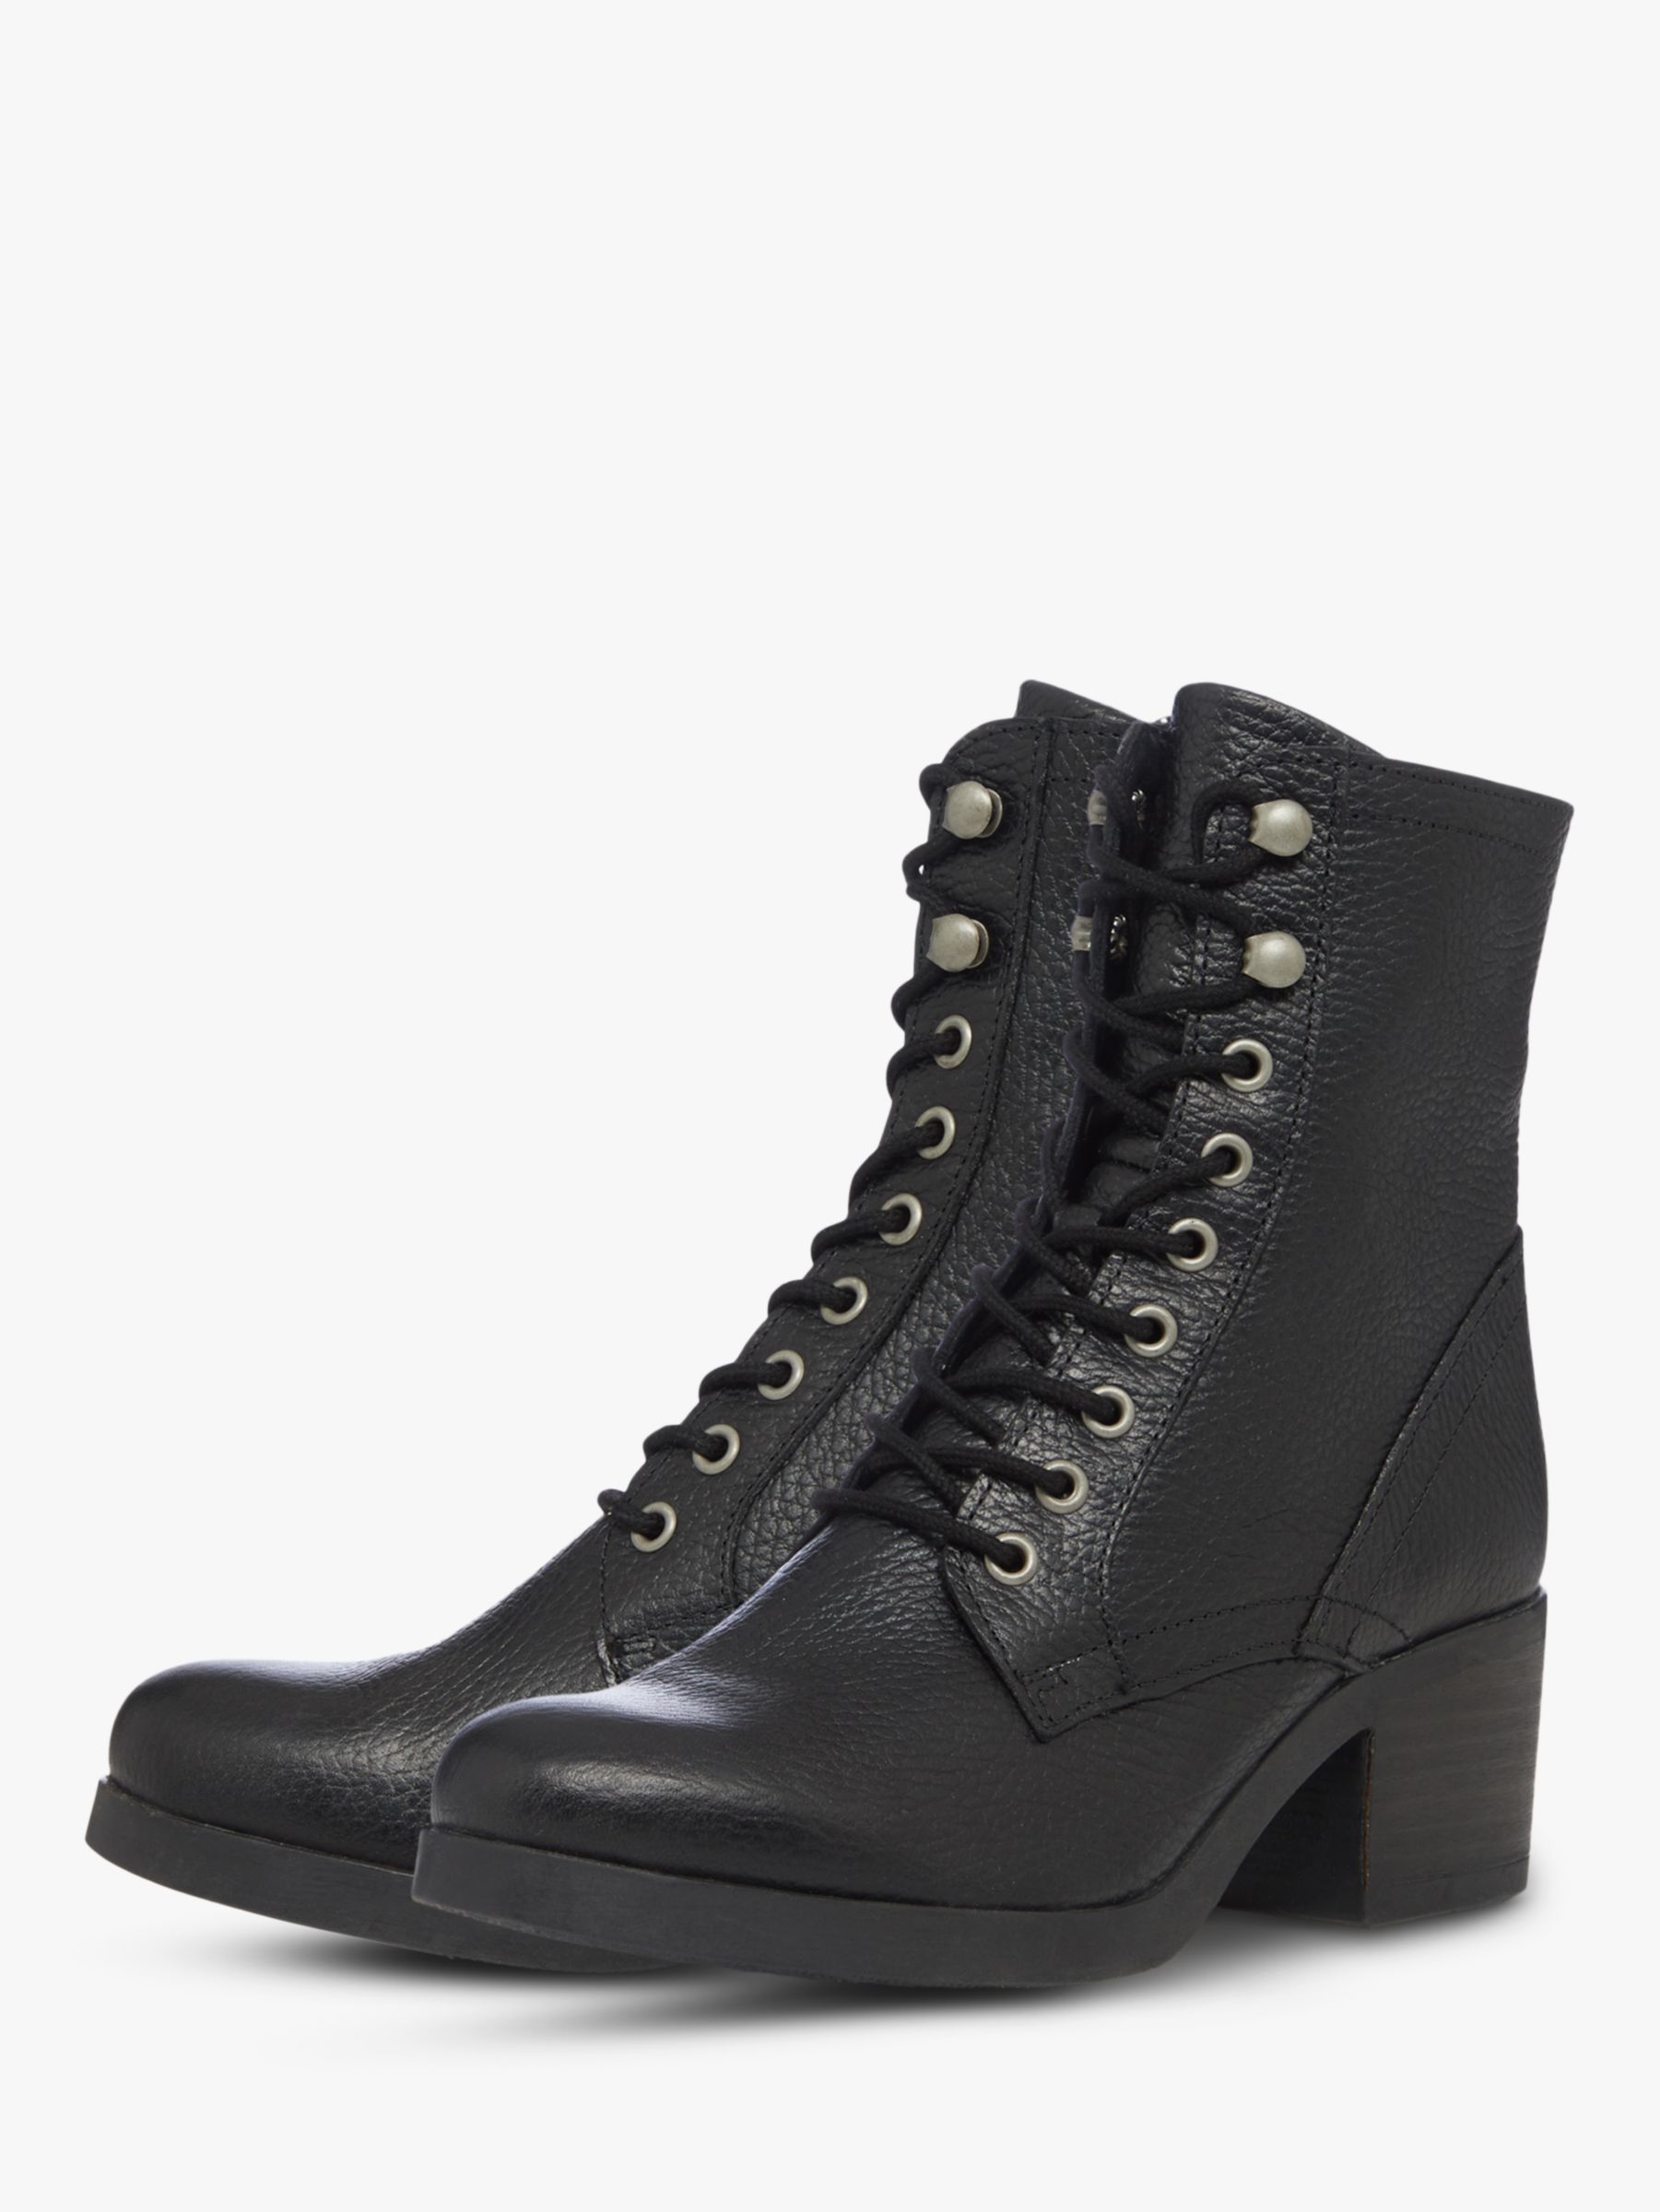 Bertie Painter Leather Lace Up Ankle Boots, Black at John Lewis & Partners